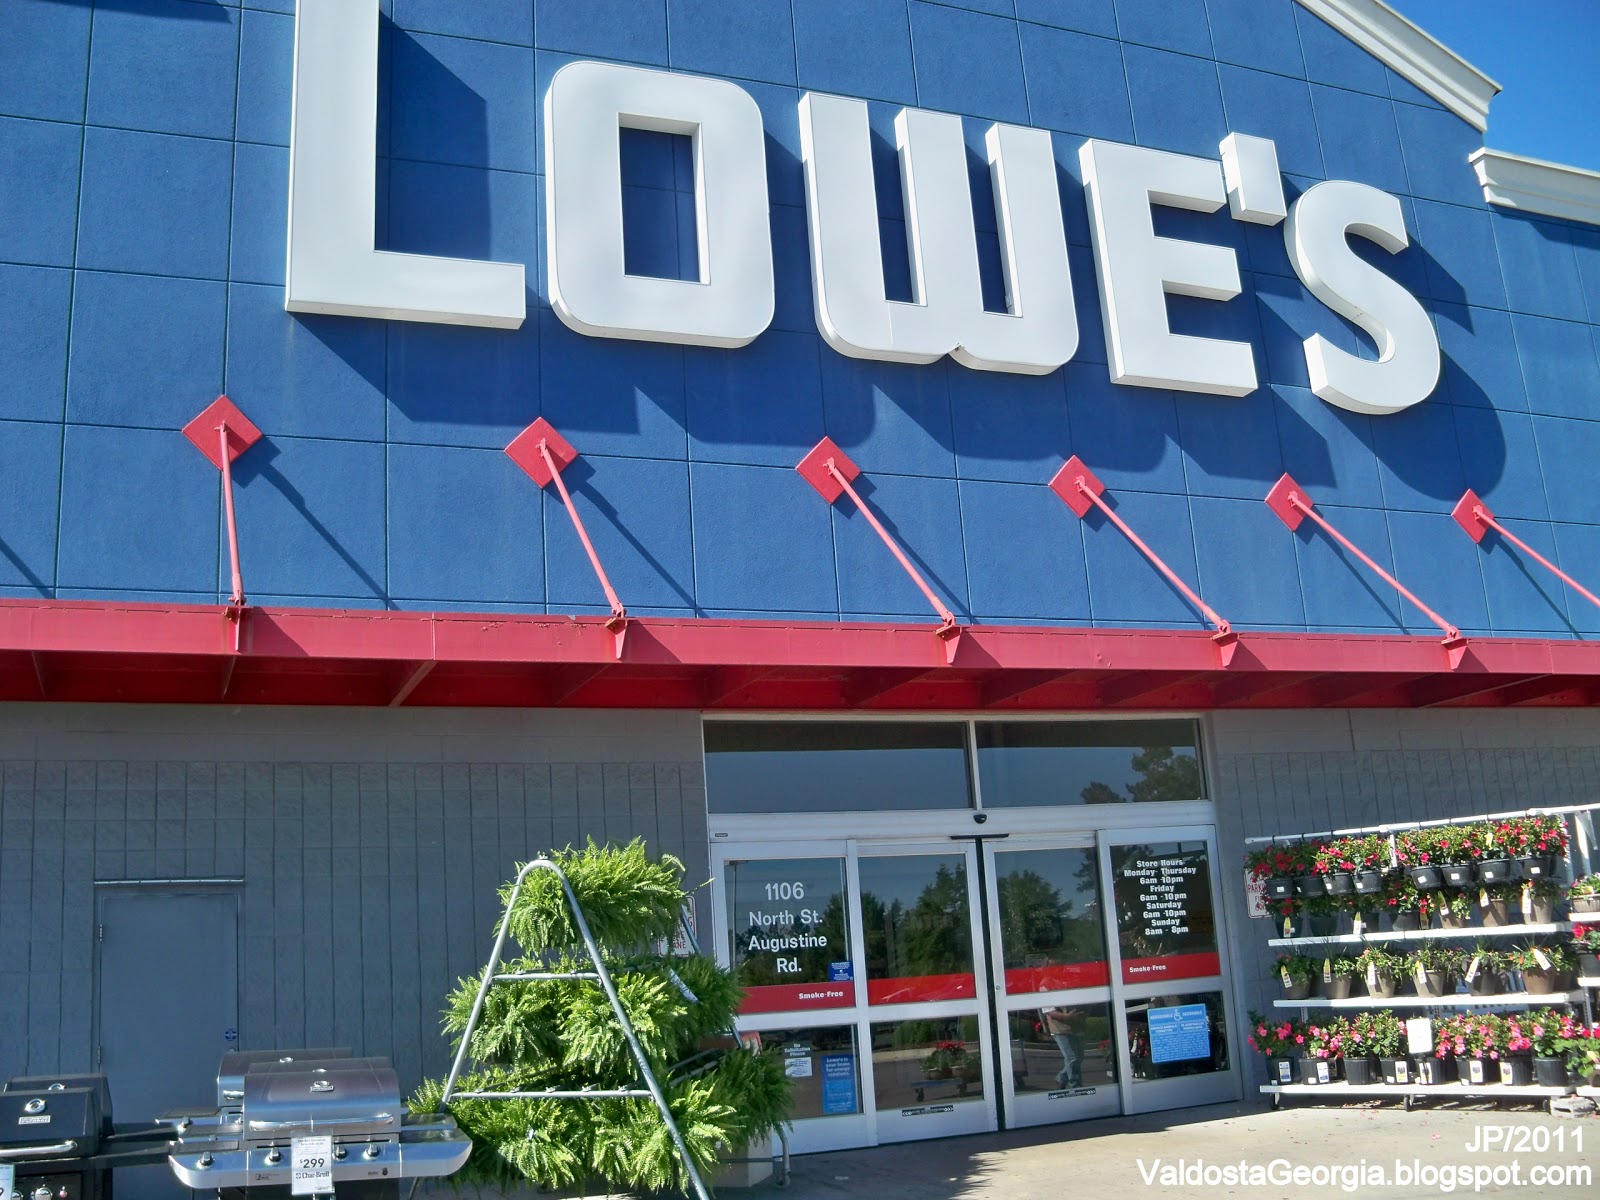 What are Lowe's store hours?